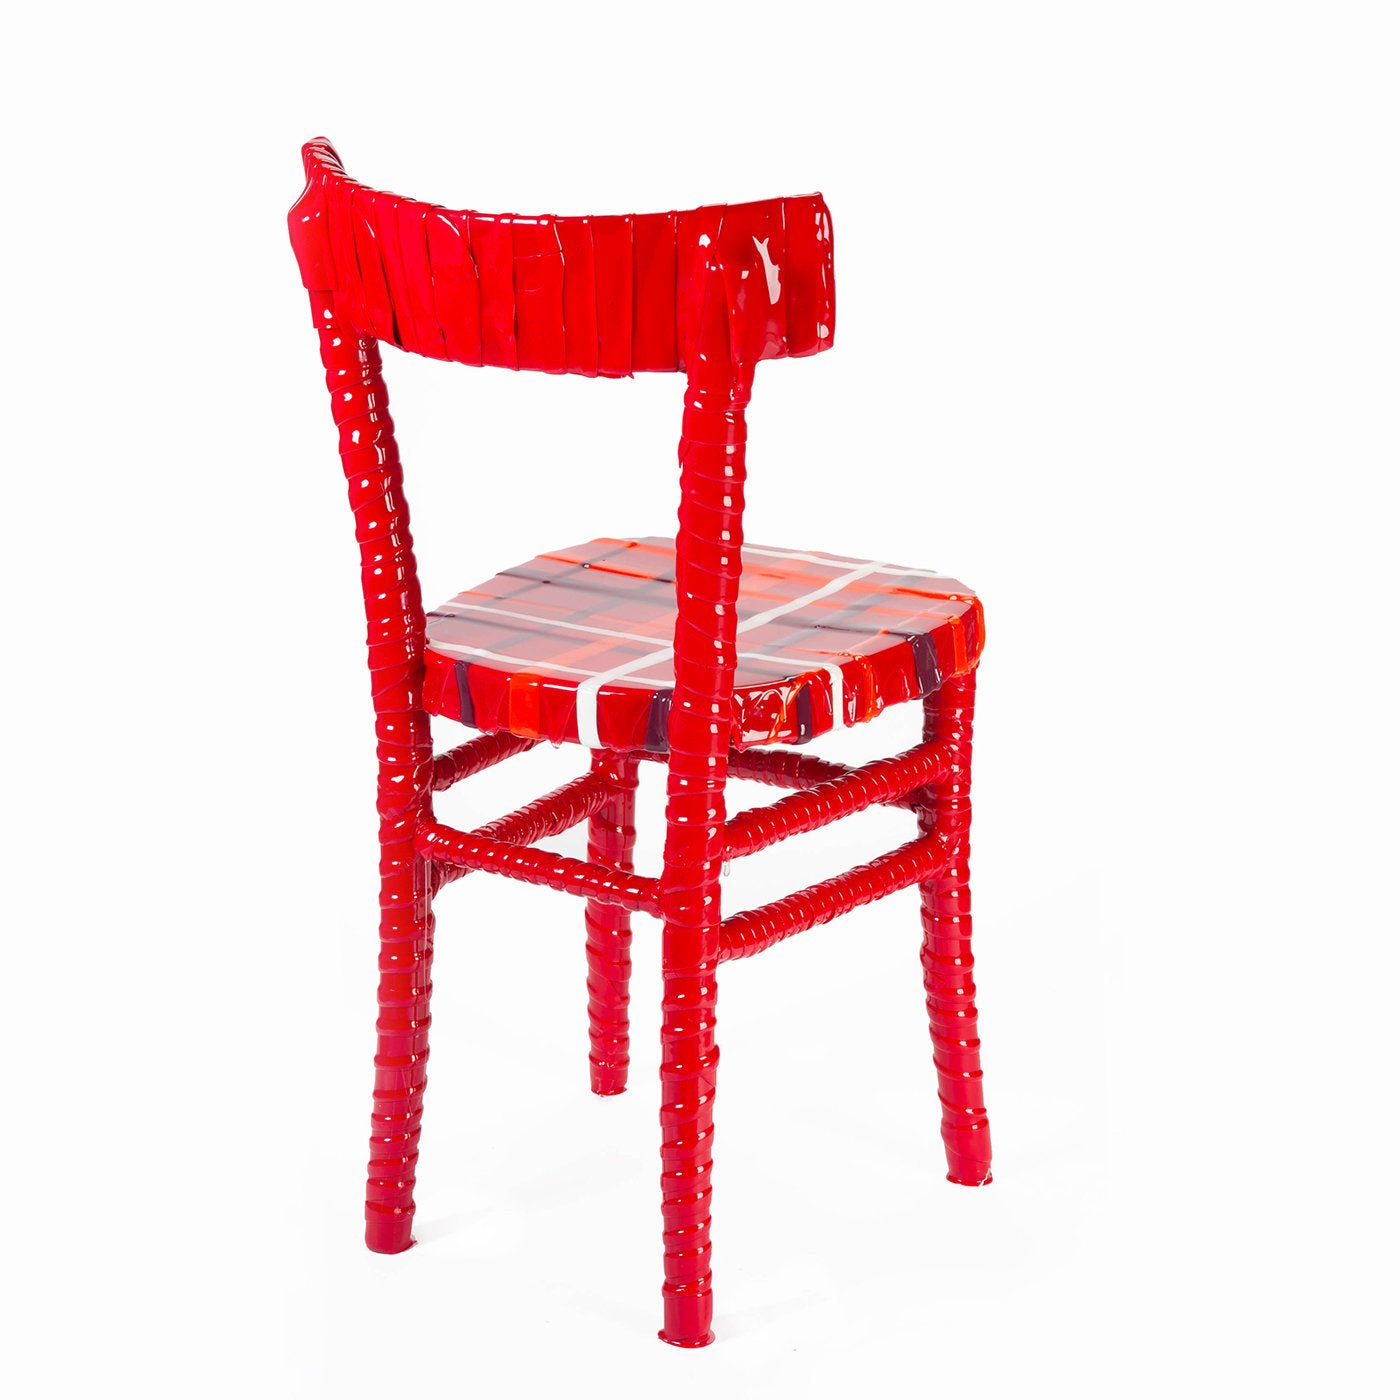 N. 02/20 One-Off striped red resin chair by Paola Navone - Alternative view 1